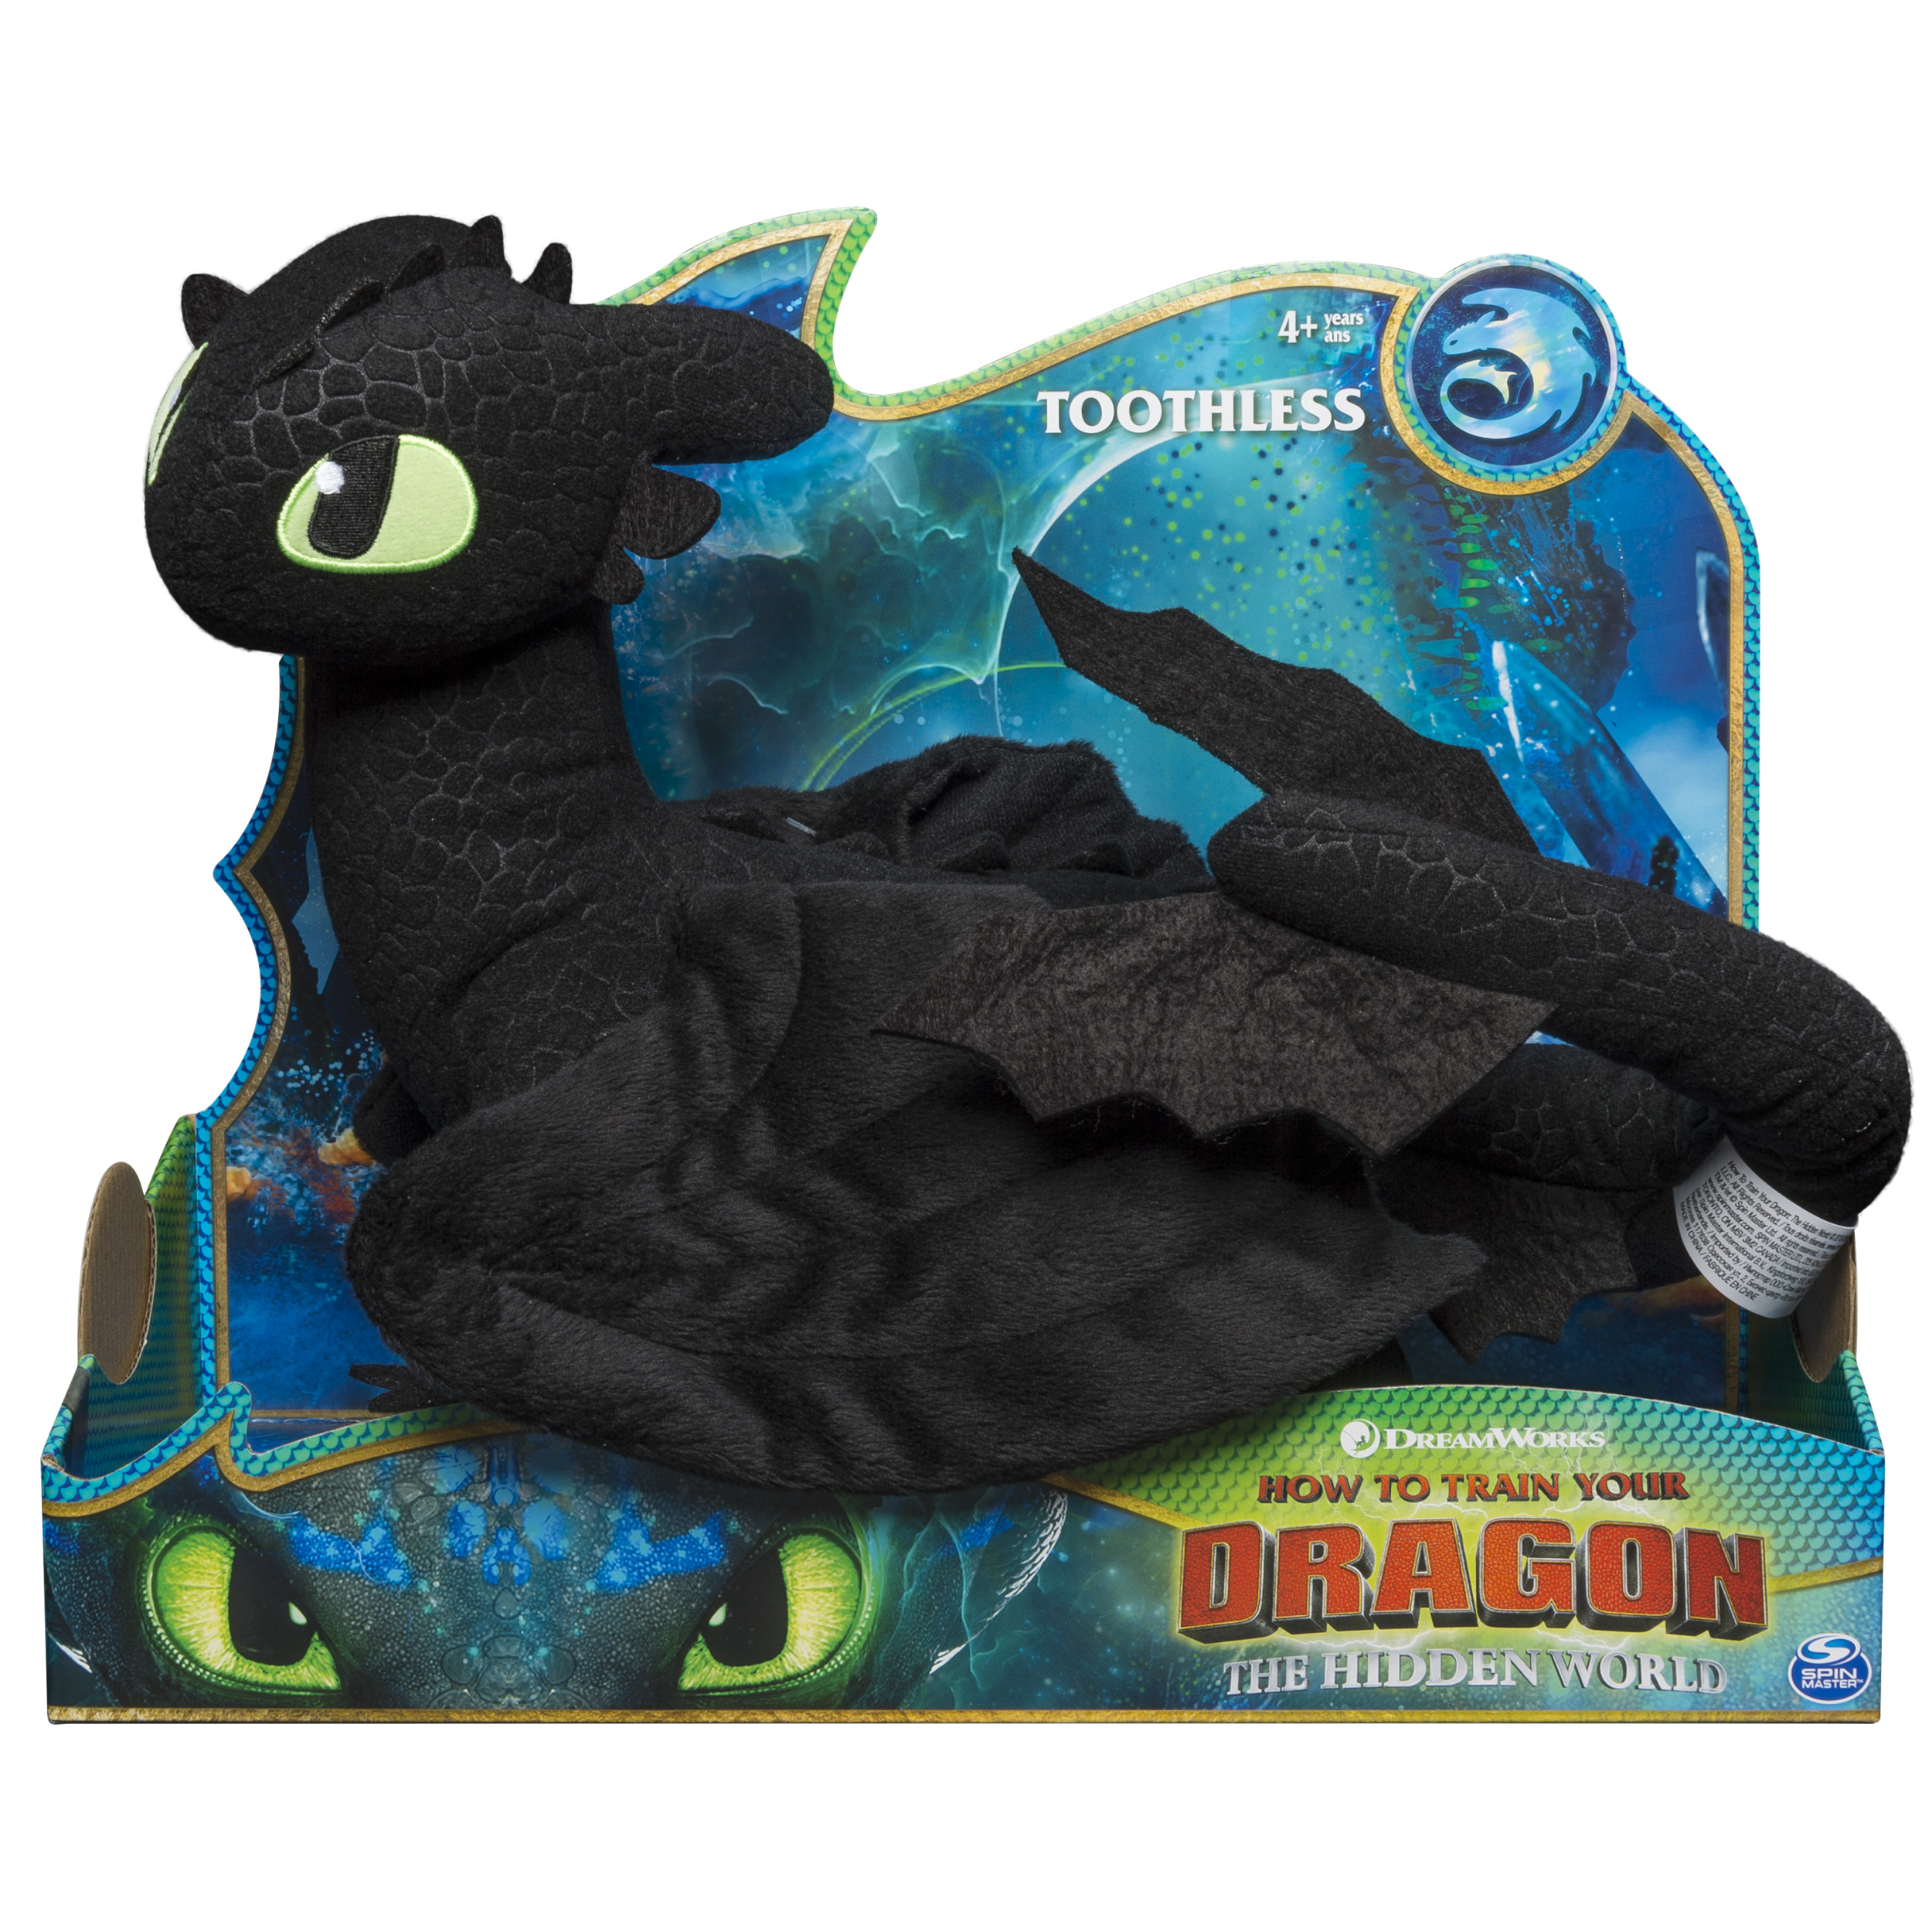 DreamWorks Dragons, Toothless 14-inch Deluxe Plush Dragon, for Kids Aged 4 and up - image 1 of 3